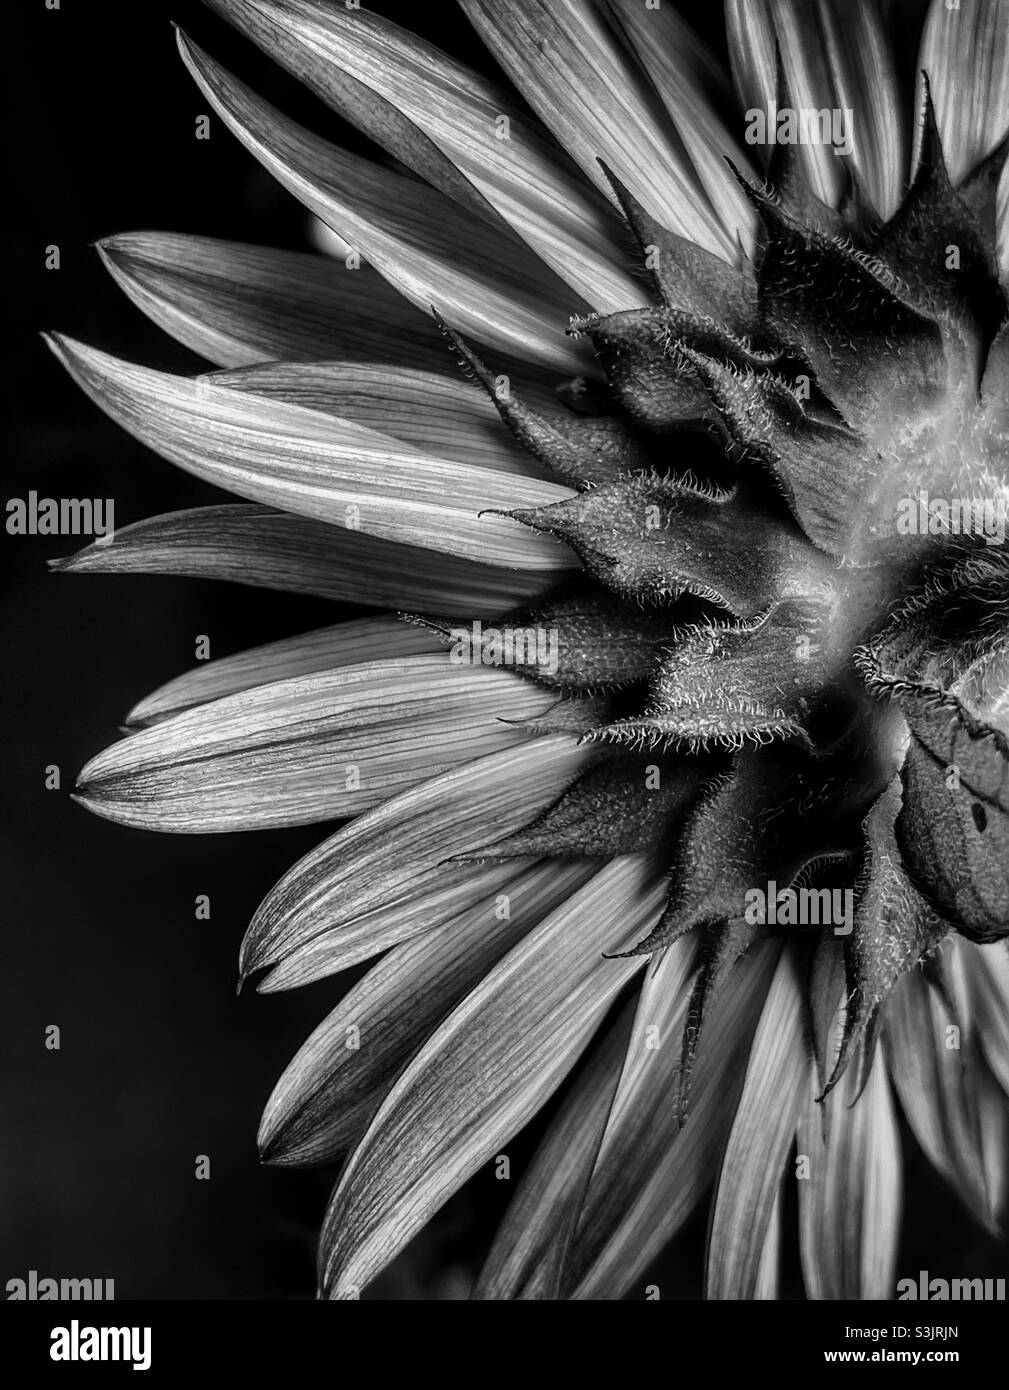 Backside of a sunflower in black and white Stock Photo